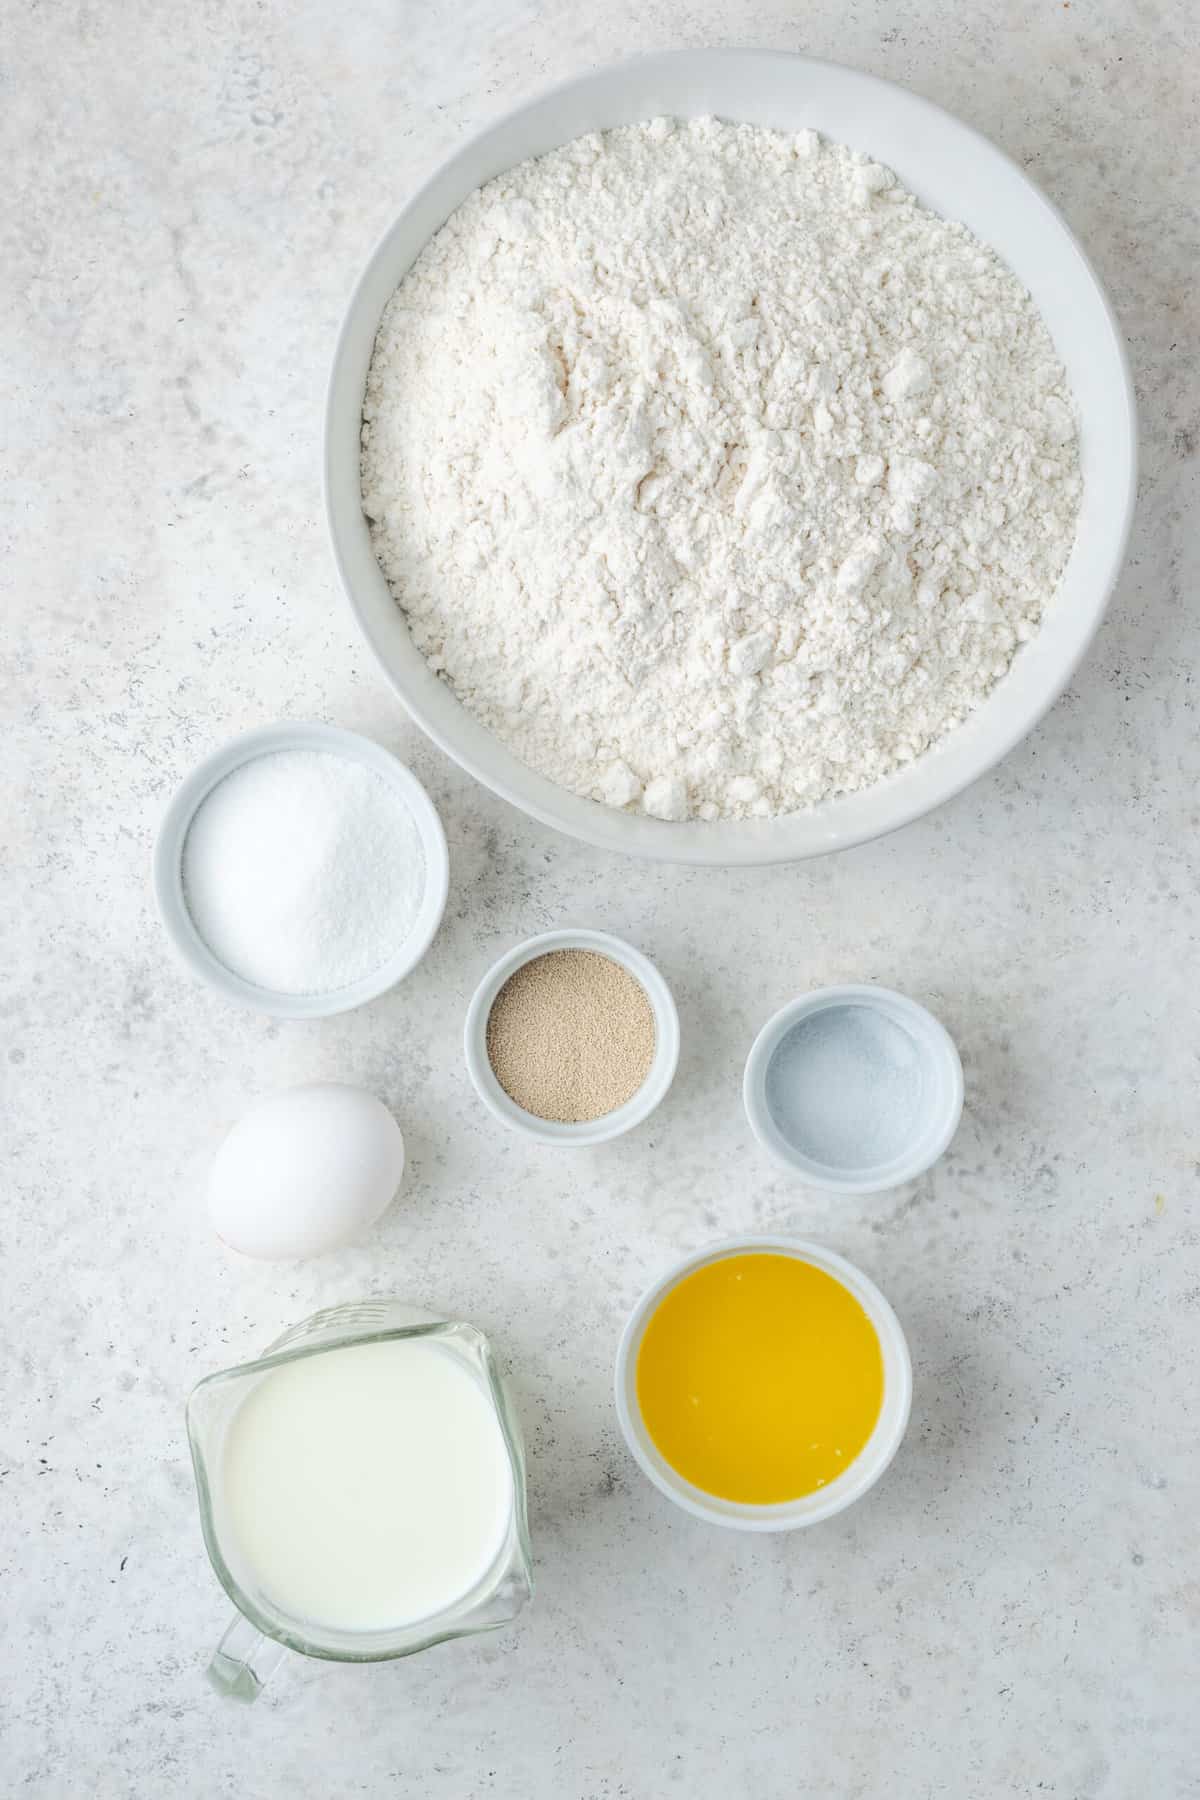 Ingredients needed to make gluten-free donuts are shown, including  eggs, yeast and butter.